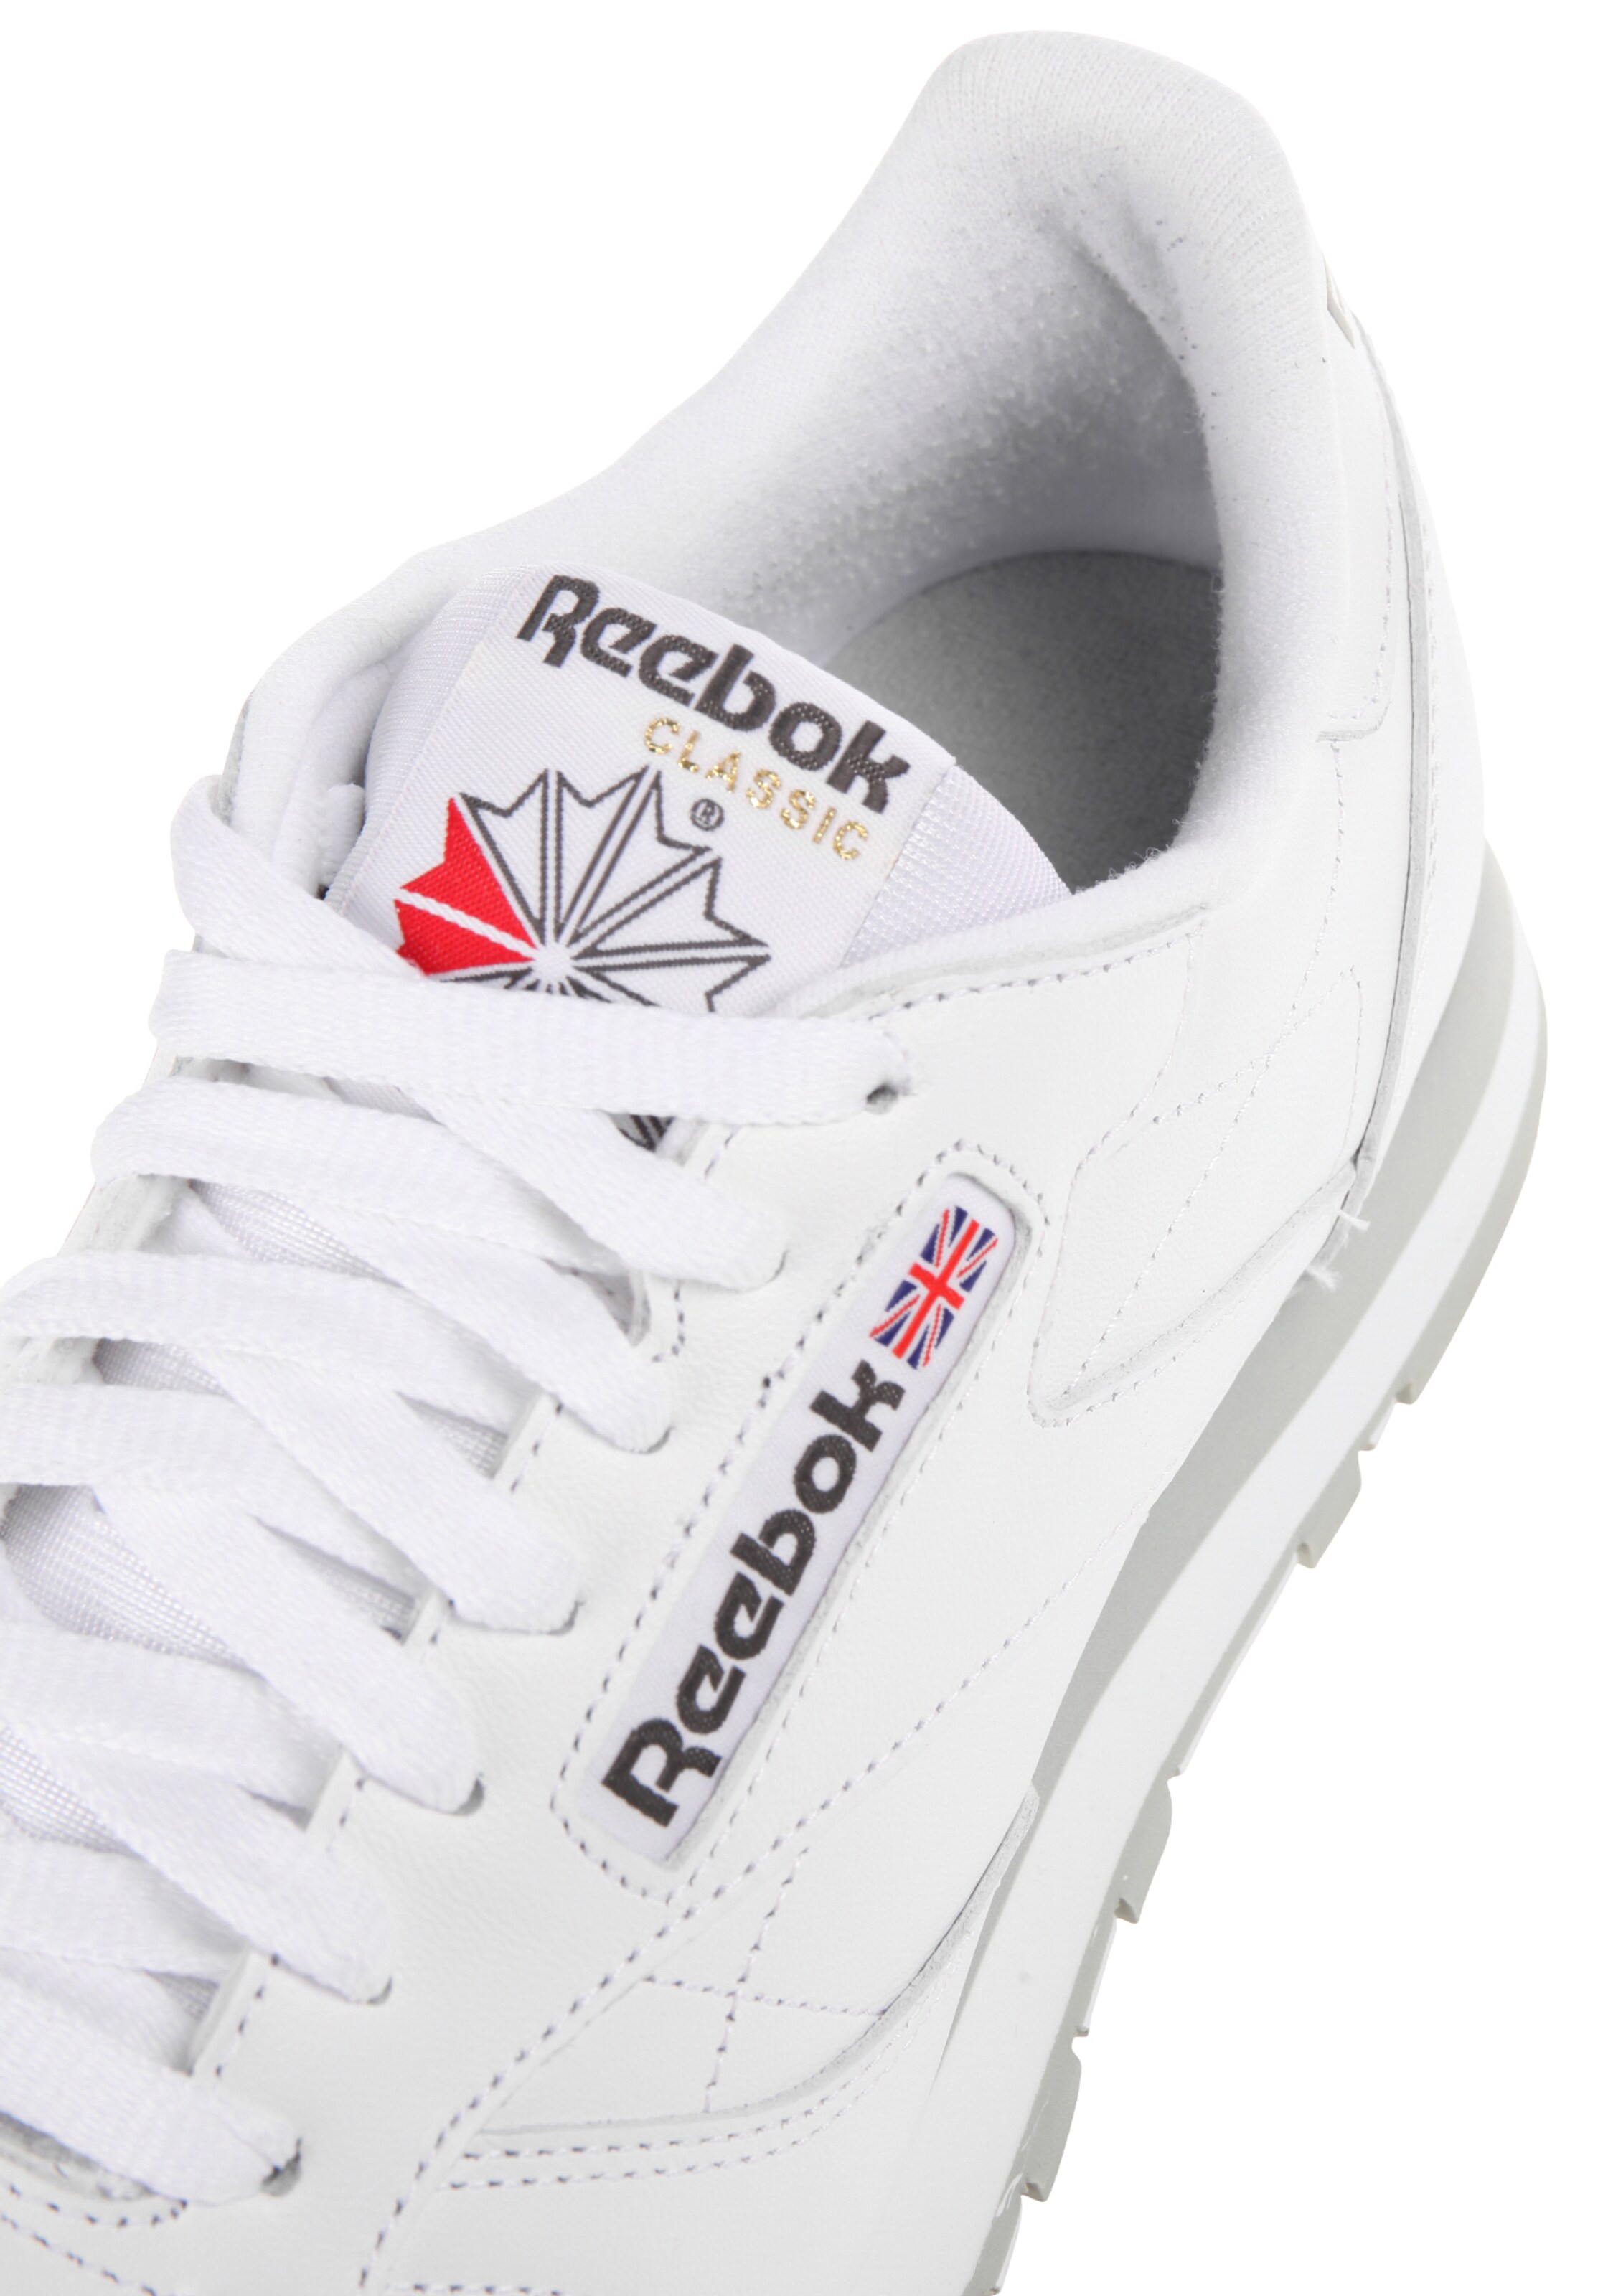 Reebok Classic Sportschuh in weiß | ABOUT YOU